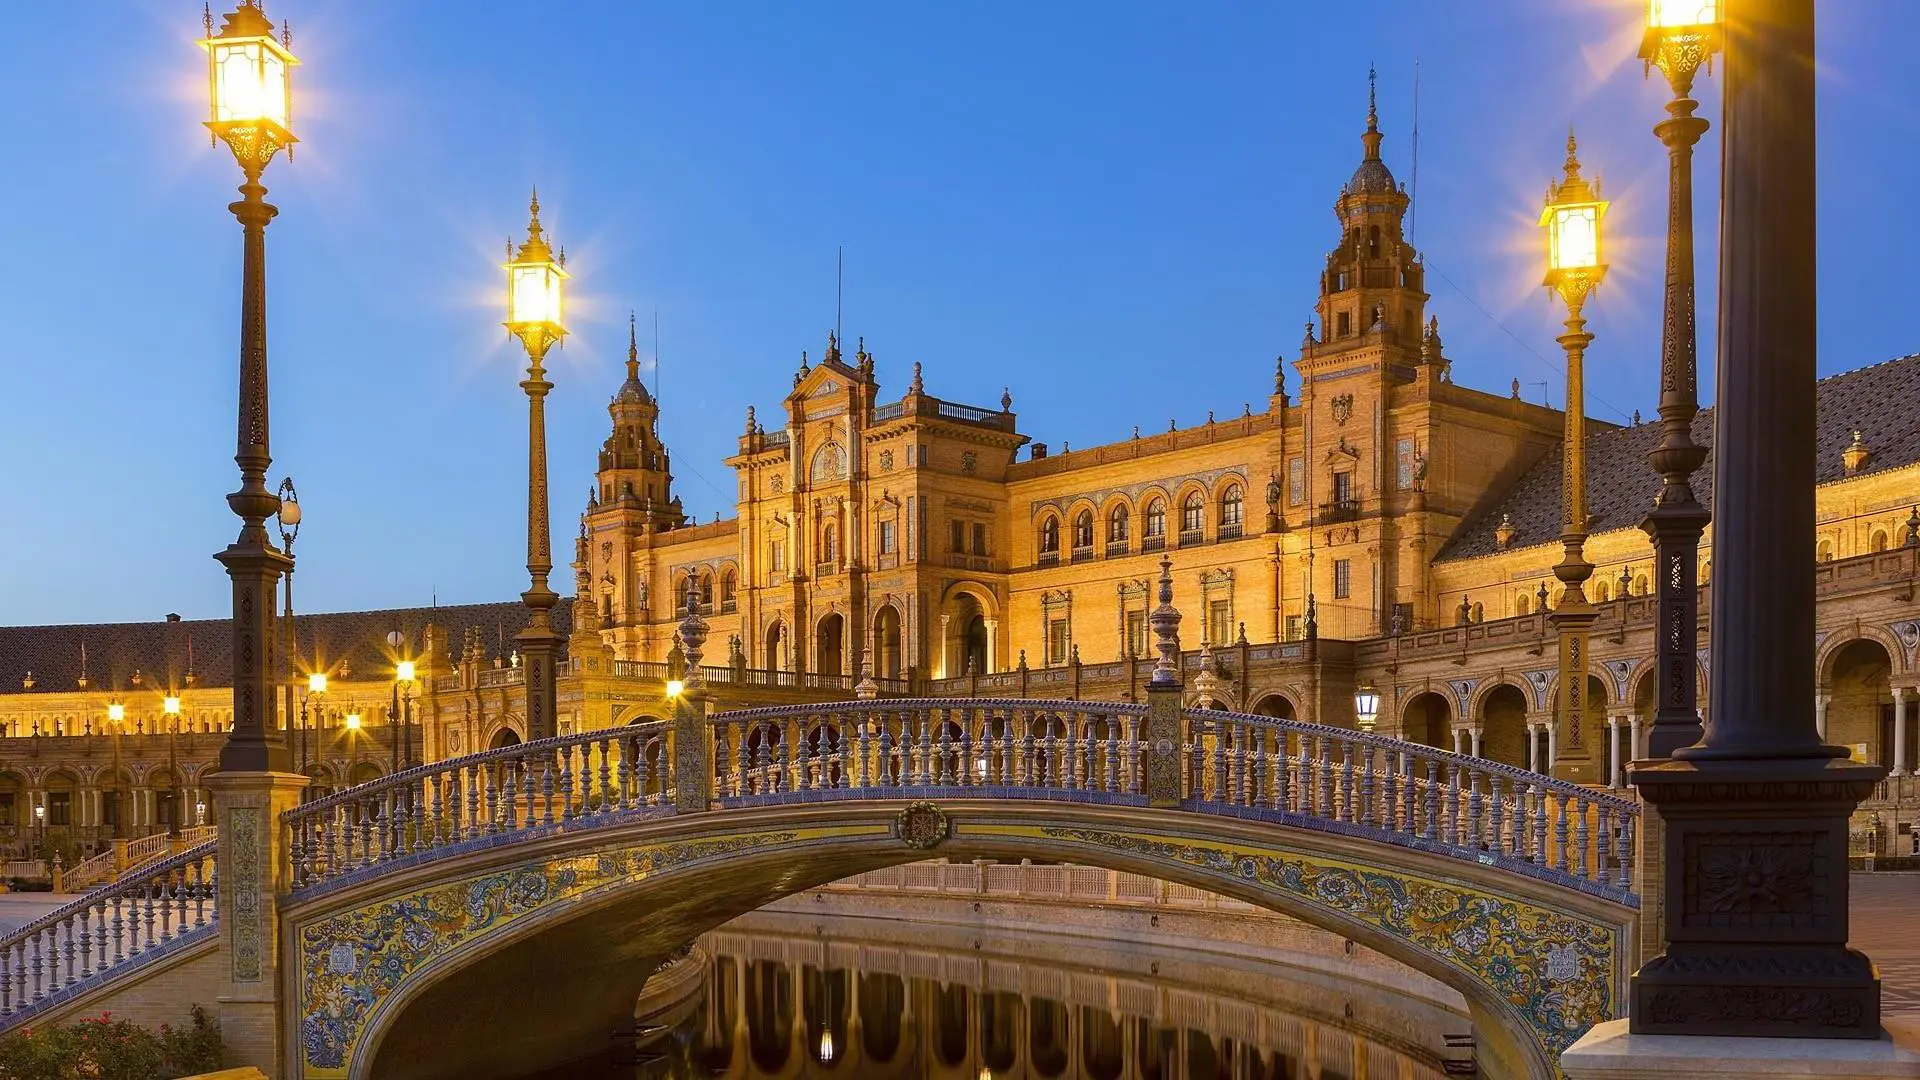 Top 4 Upcoming Tech Conferences in Spain that you shouldn't miss